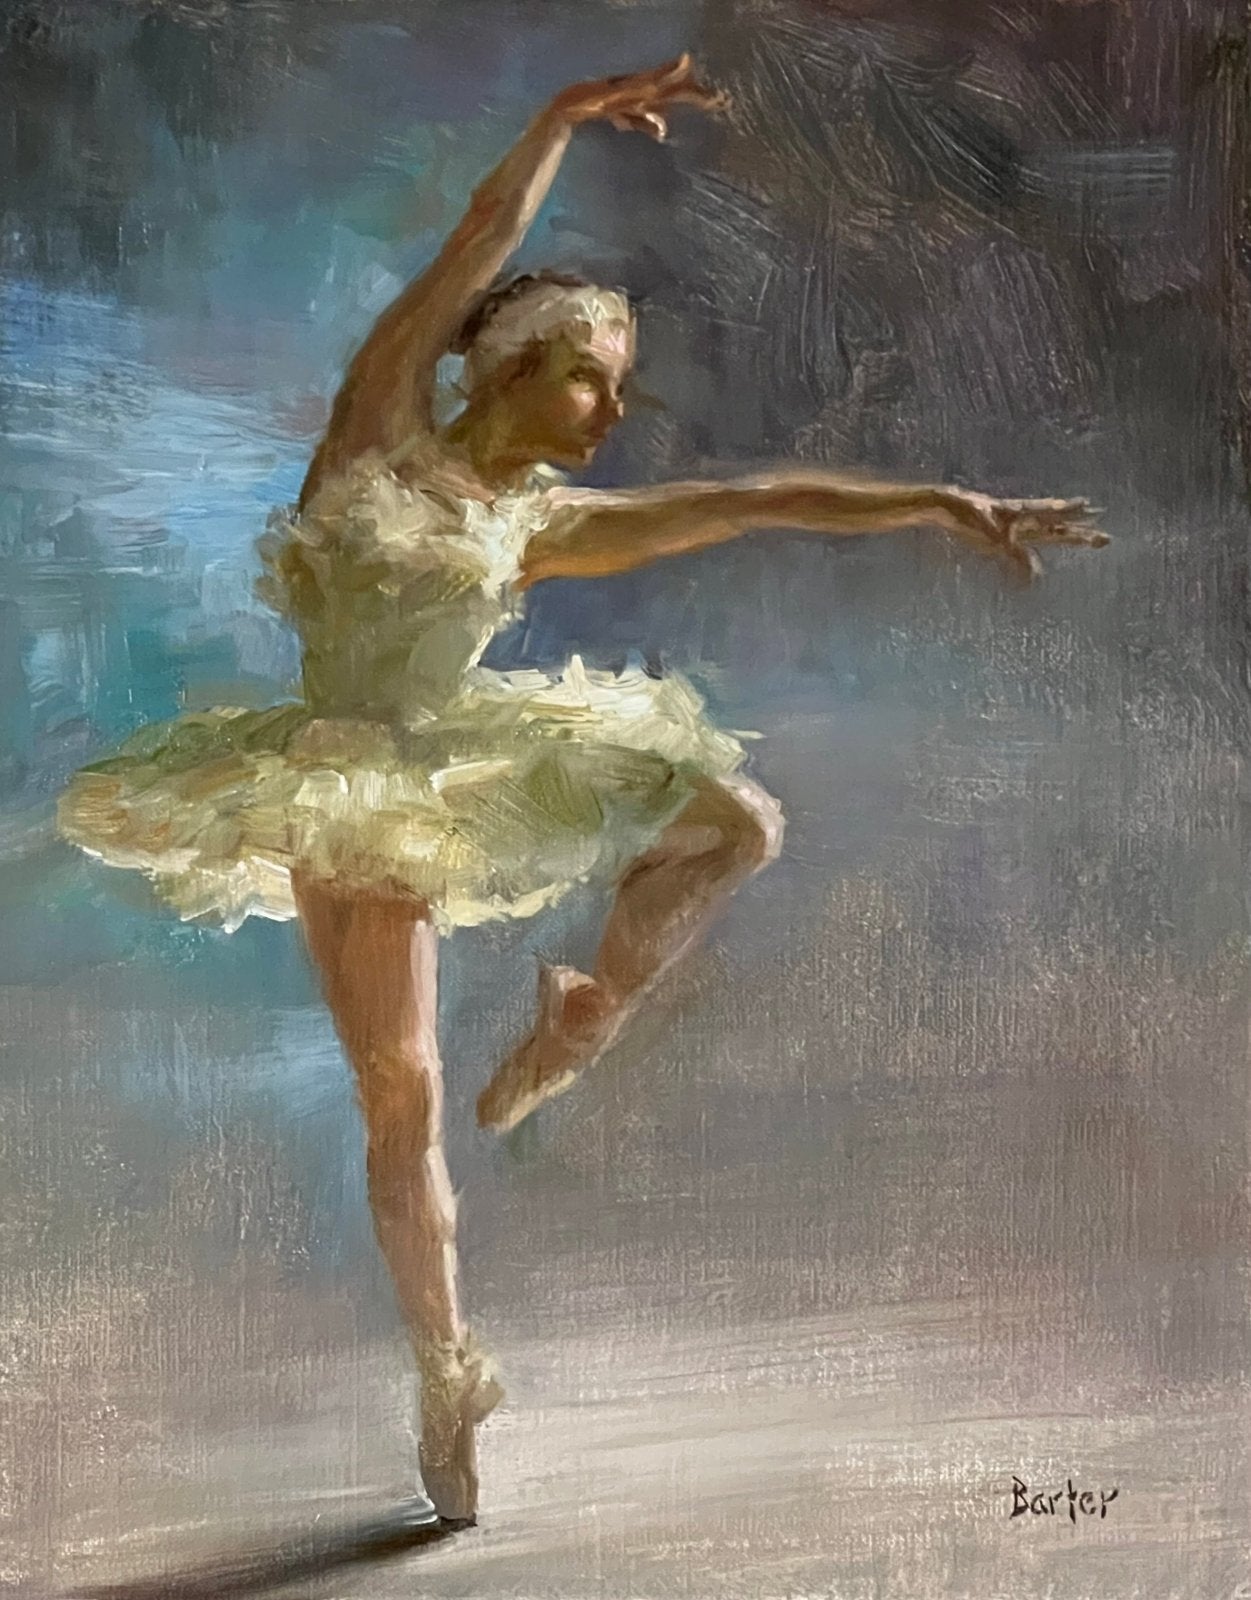 Prima Ballerina by Stacy Barter at LePrince Galleries